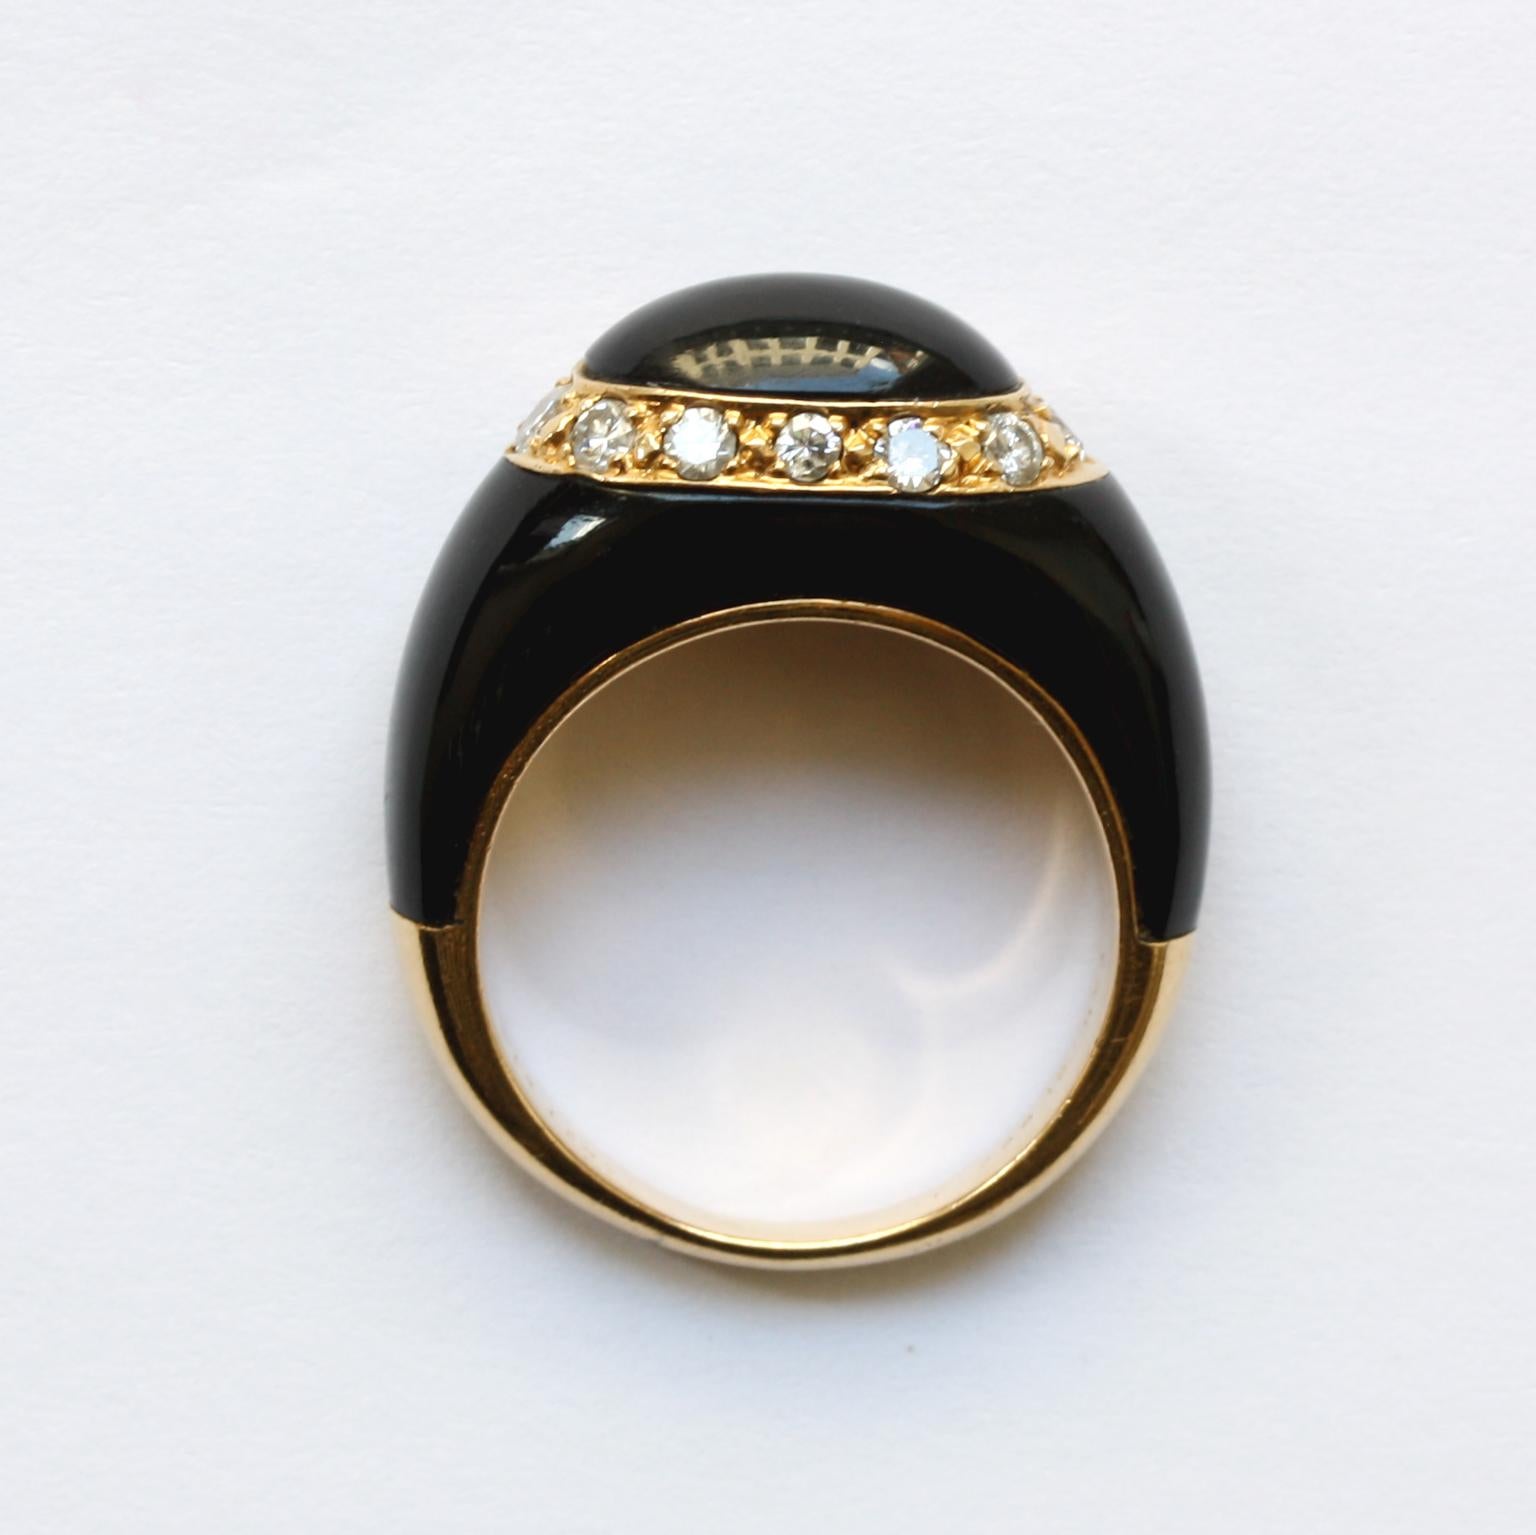 Van Cleef & Arpels 18 Karat Gold, Onyx and Diamond Fidji Ring In Good Condition For Sale In Amsterdam, NL